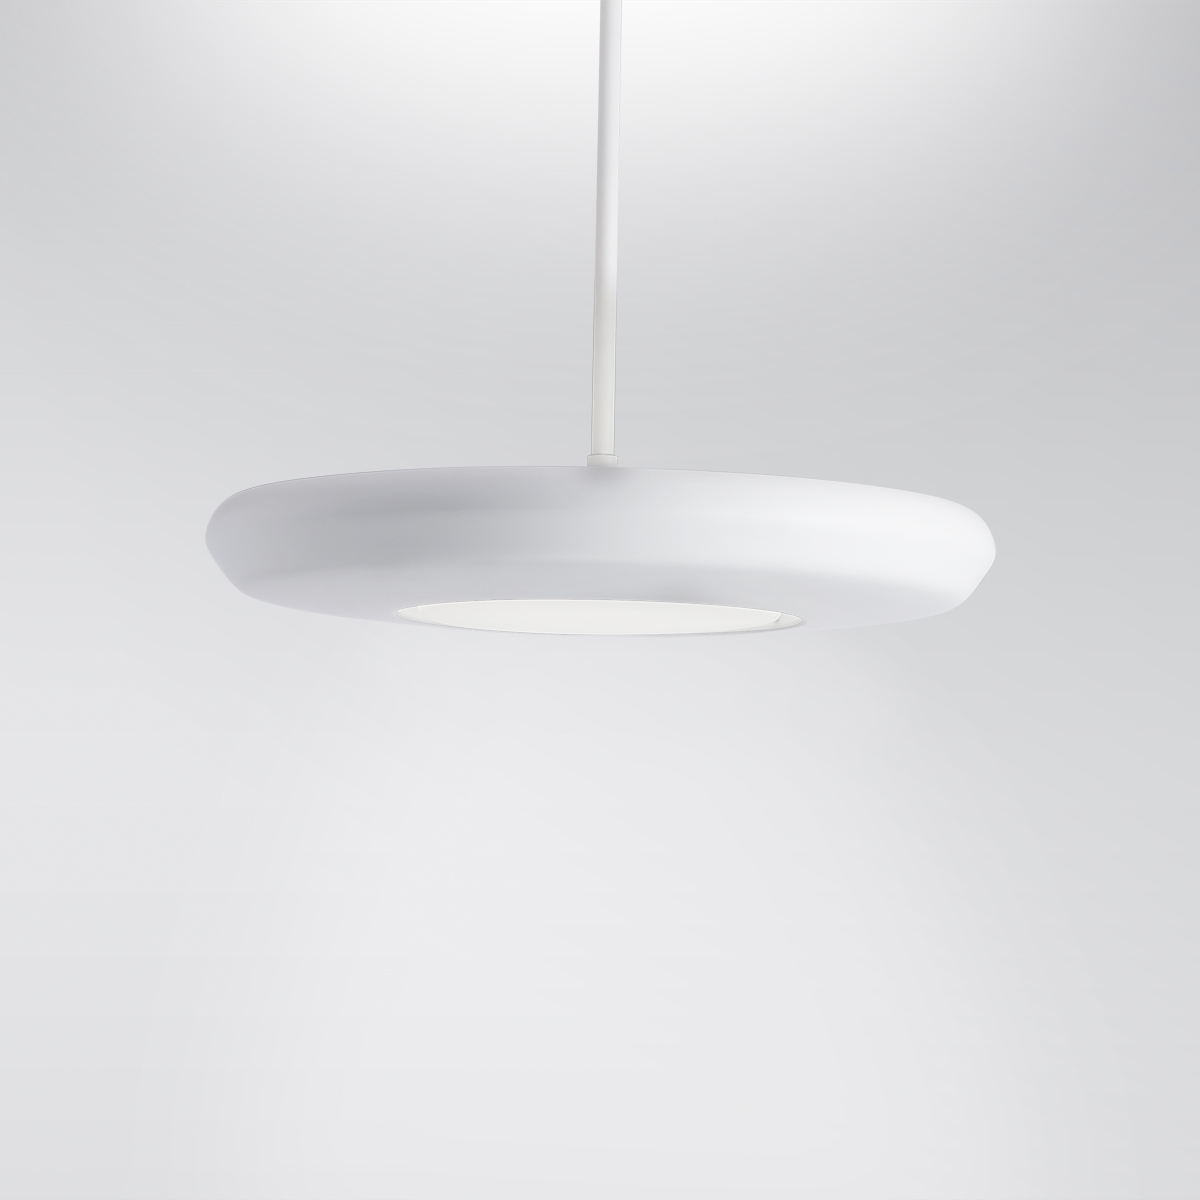 CP4450 Aries A round, disc-shaped pendant with a luminous downlight diffuser in the center